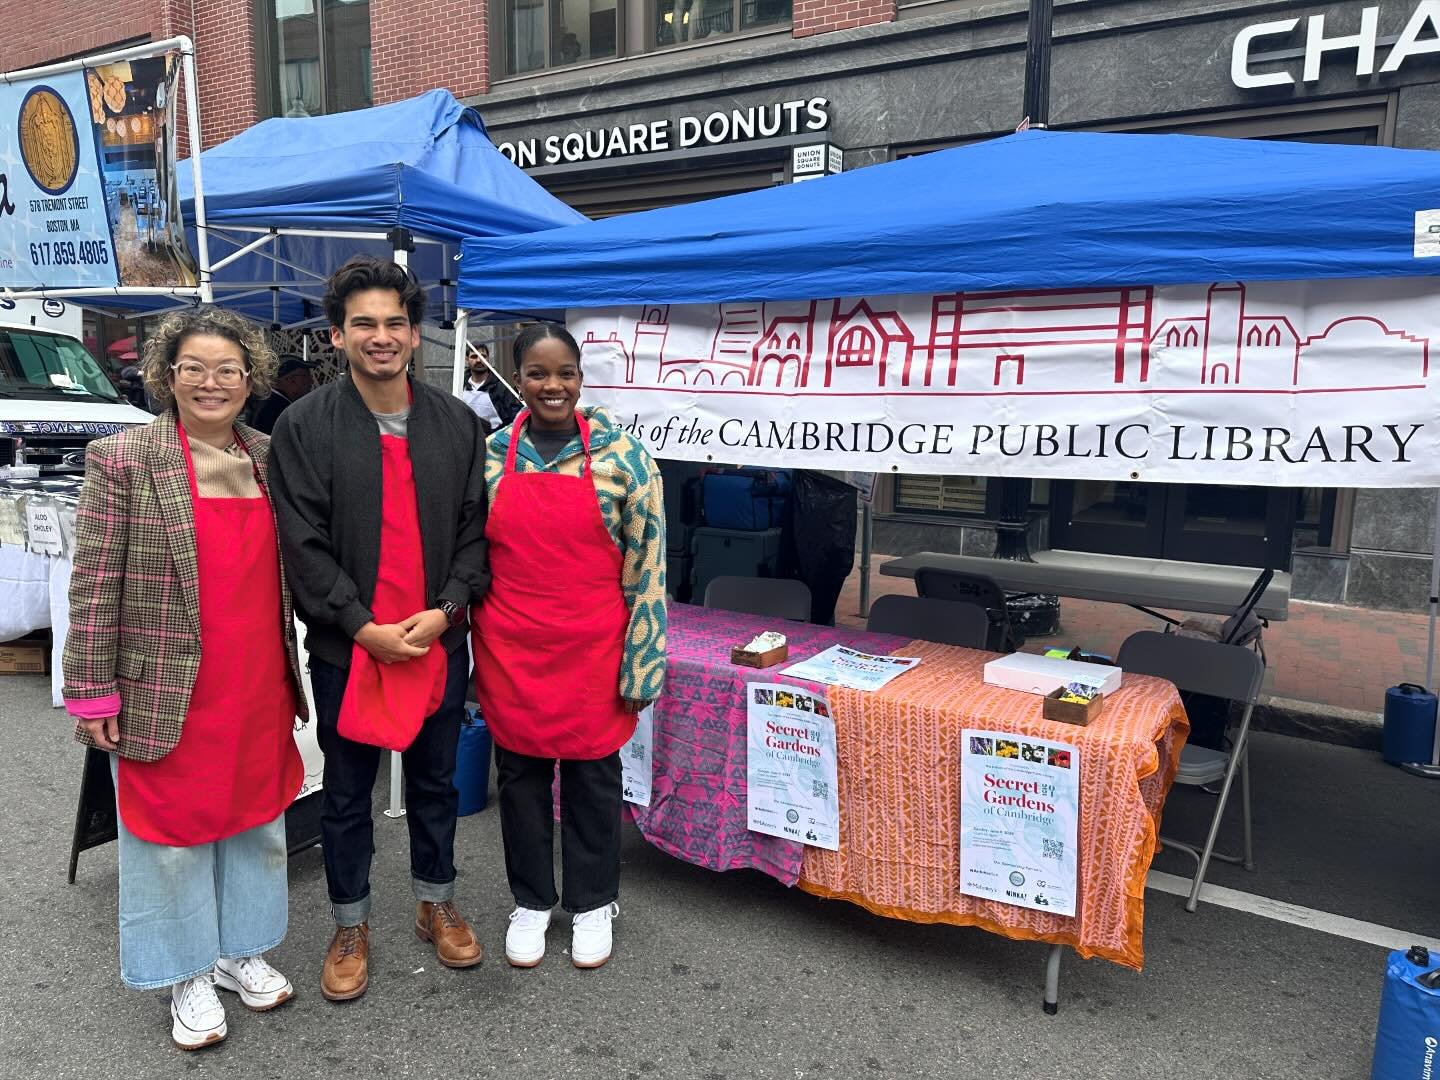 The Friends of CPL have a booth on JFK Street at the 39th annual MayFair Festival in Harvard Square. Tickets to the Secret Gardens of Cambridge are now live on our website via EventBrite. Stop by and pick up a beautiful bookmark or sticker.
.
.
.
.
.